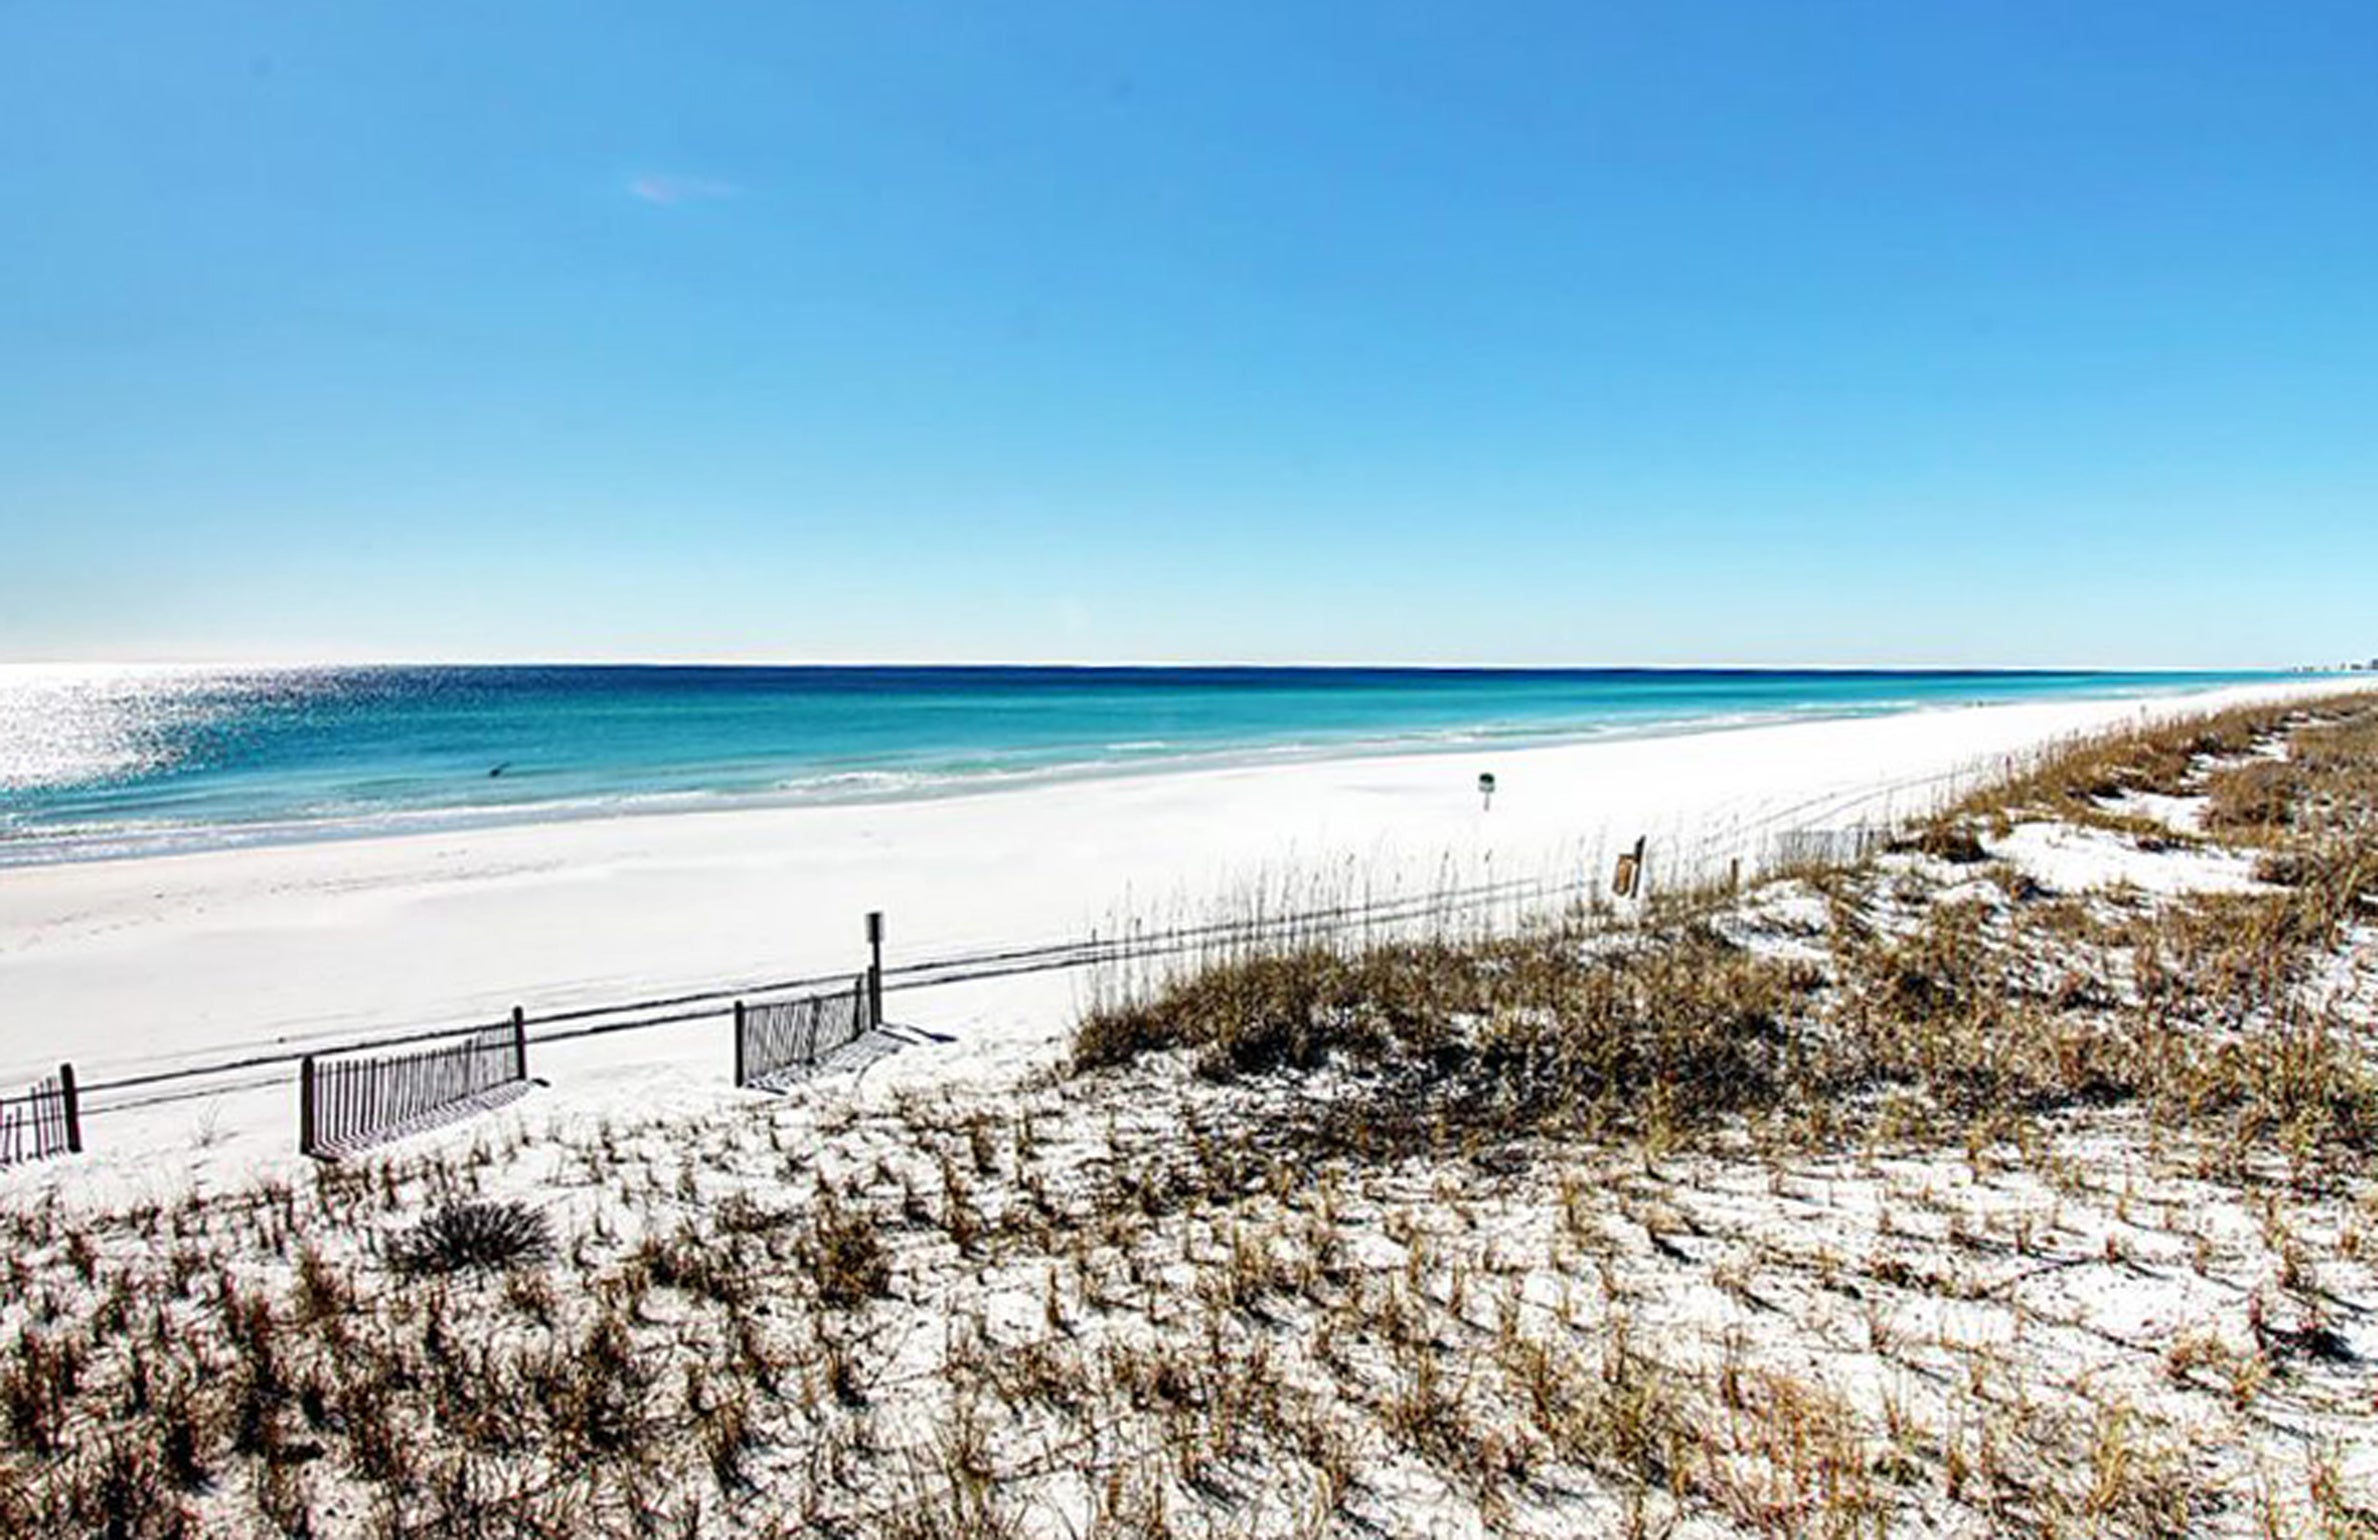 This gorgeous beach is your backyard